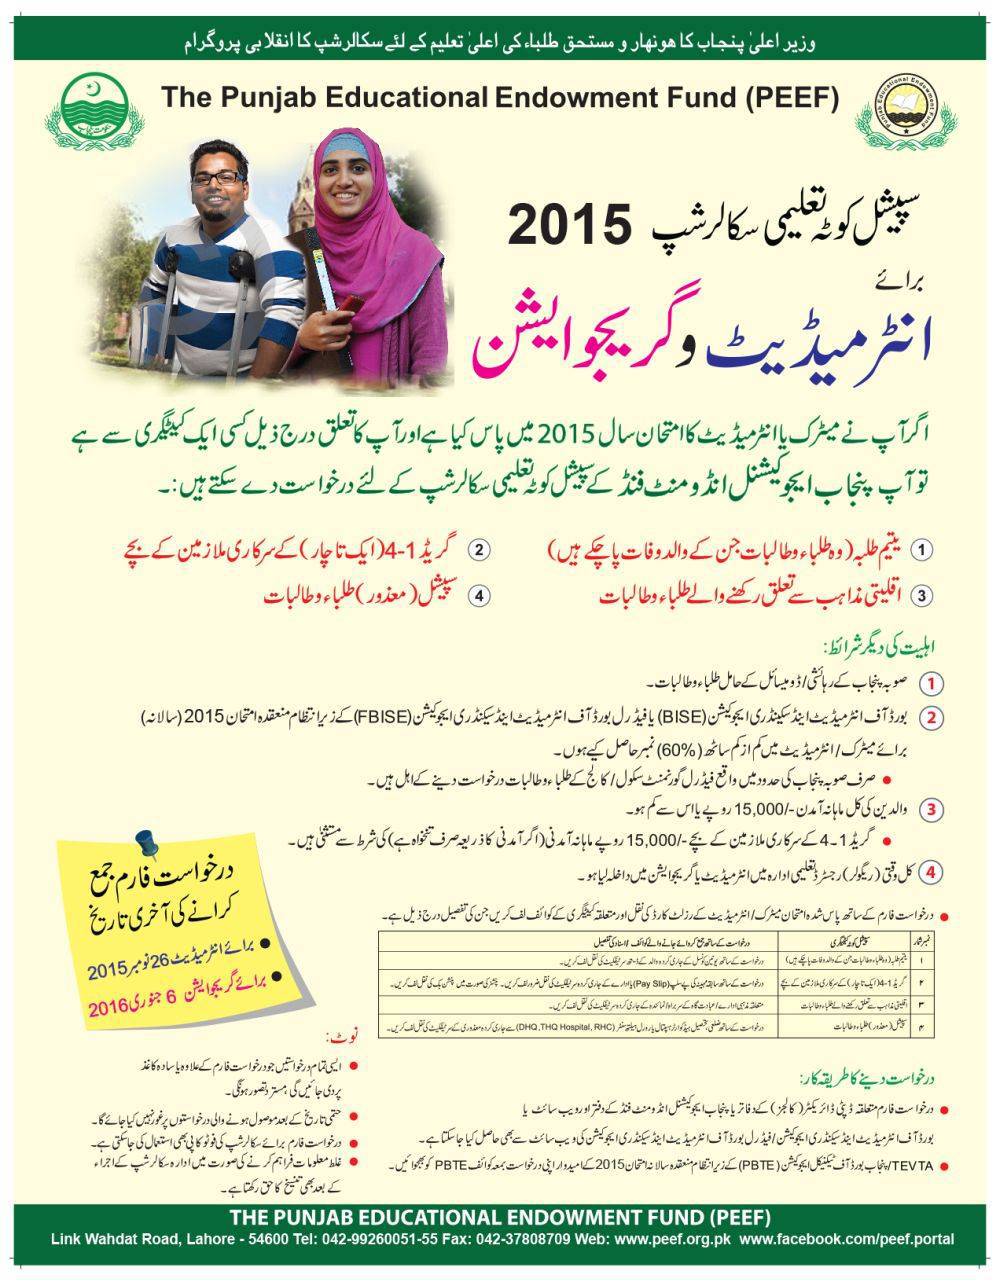 Punjab Educational Endowment Fund PEEF announces Special Quota Scholarships 2015 for Inter and Graduation Level